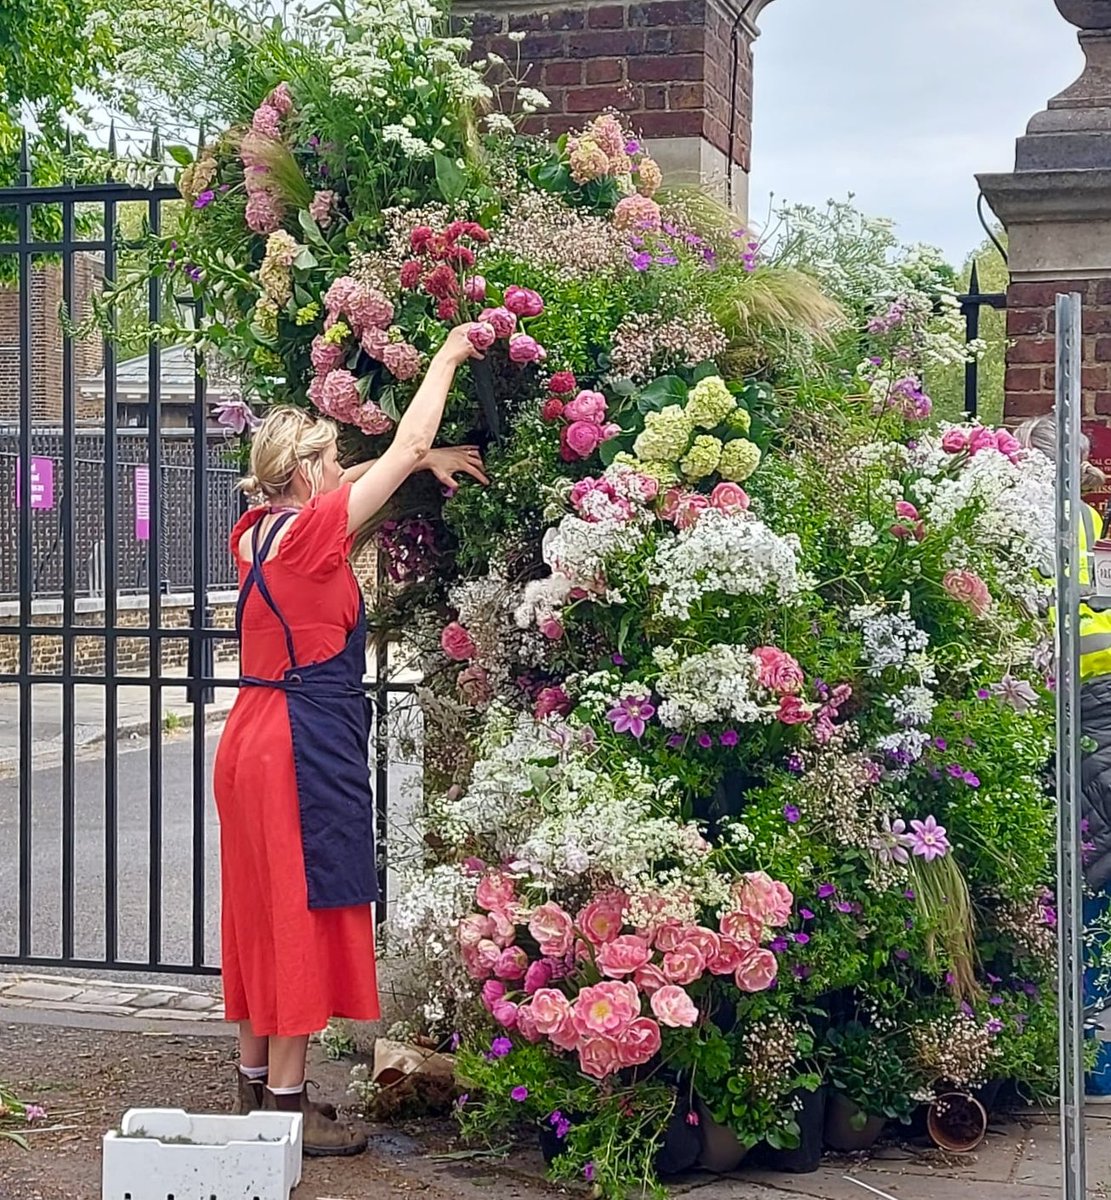 The main entrance to #rhschelsea flower show 2023 getting last minute touch up, and is looking gorgeous! #chelsealondon #flowershow